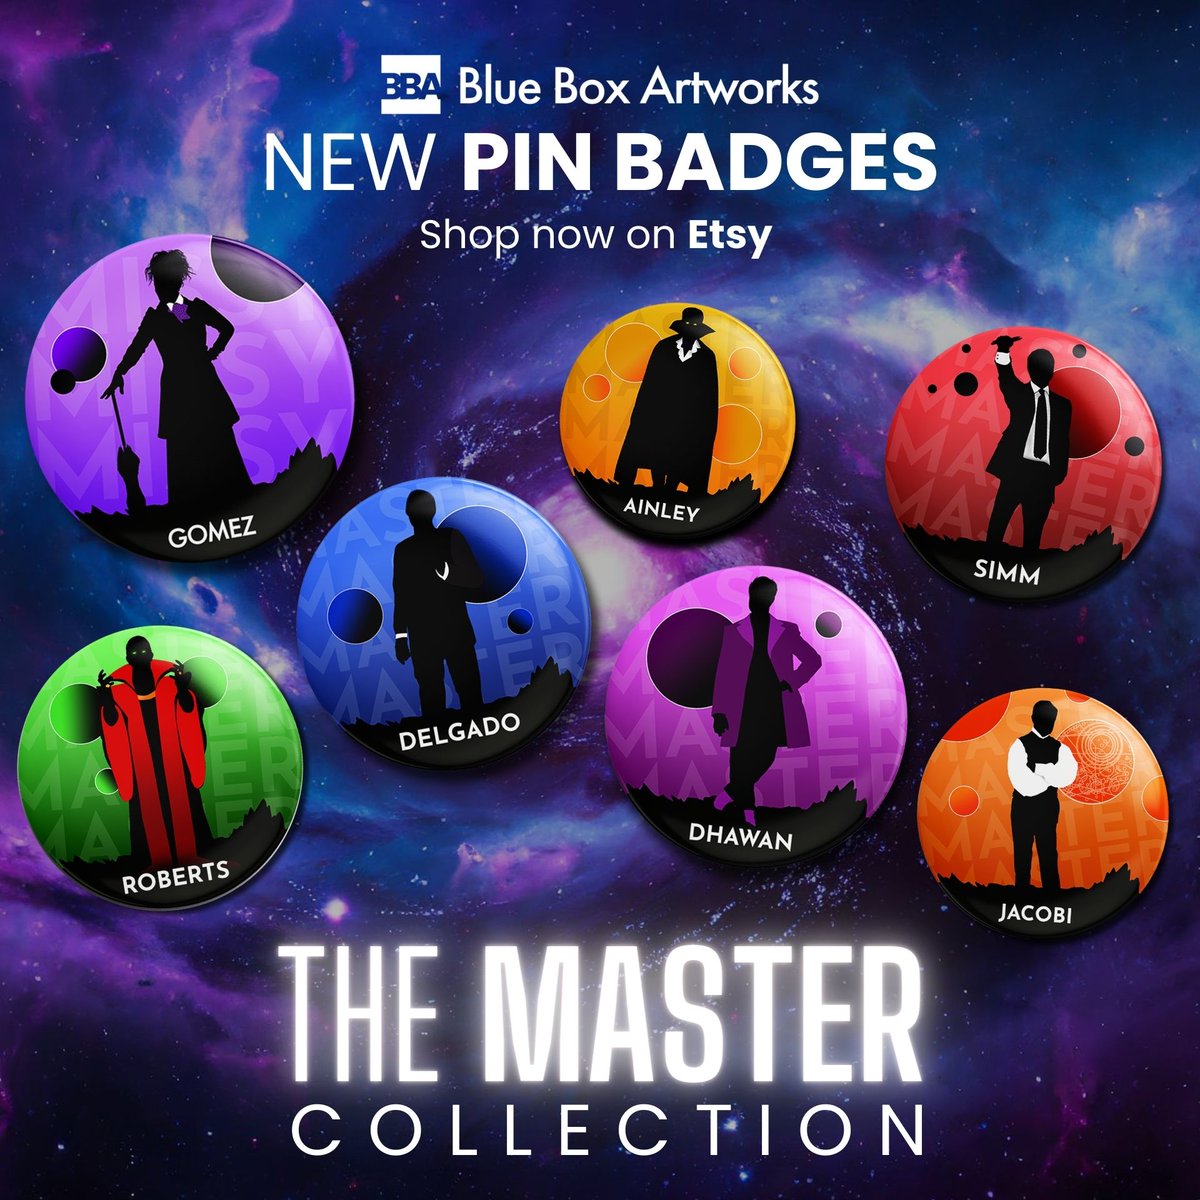 NEW BADGES! 🚨Dress for the occasion with 'The Master Collection' of #DoctorWho pin badges ✨

Pick your favourite or collect them all! 🚀 

Shop Here: blueboxartworksstore.etsy.com 

#DoctorWho #TheMaster #EtsyLaunch @sacha_dhawan #DrWho #EtsyShop